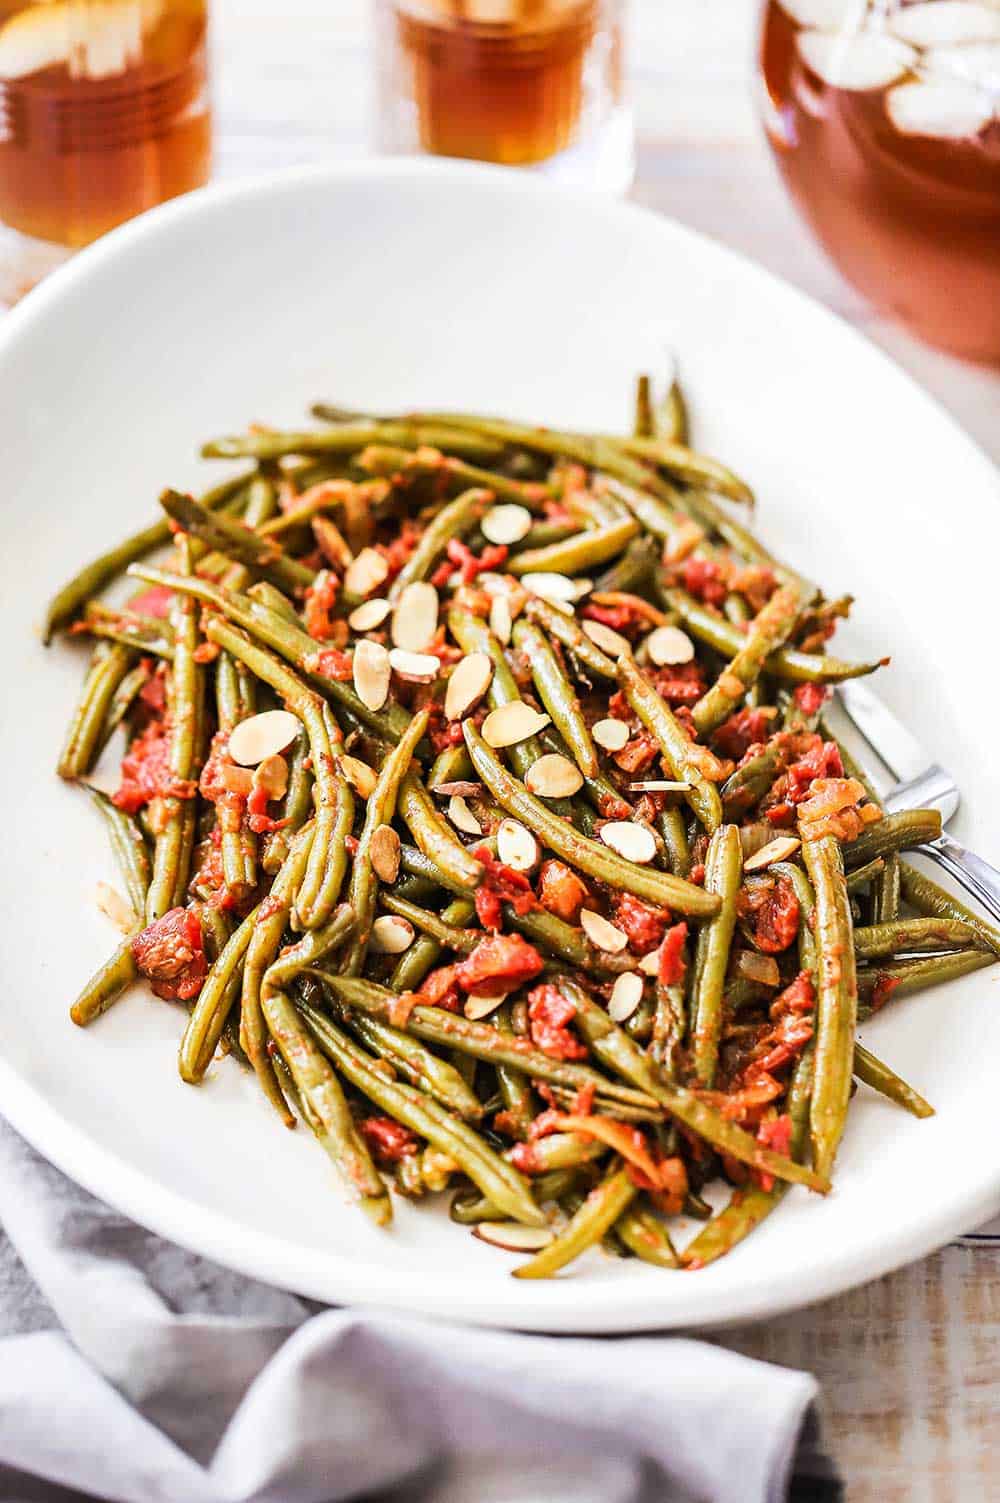 A large white serving dish filled with braised green beans with tomatoes and topped with almond slices.